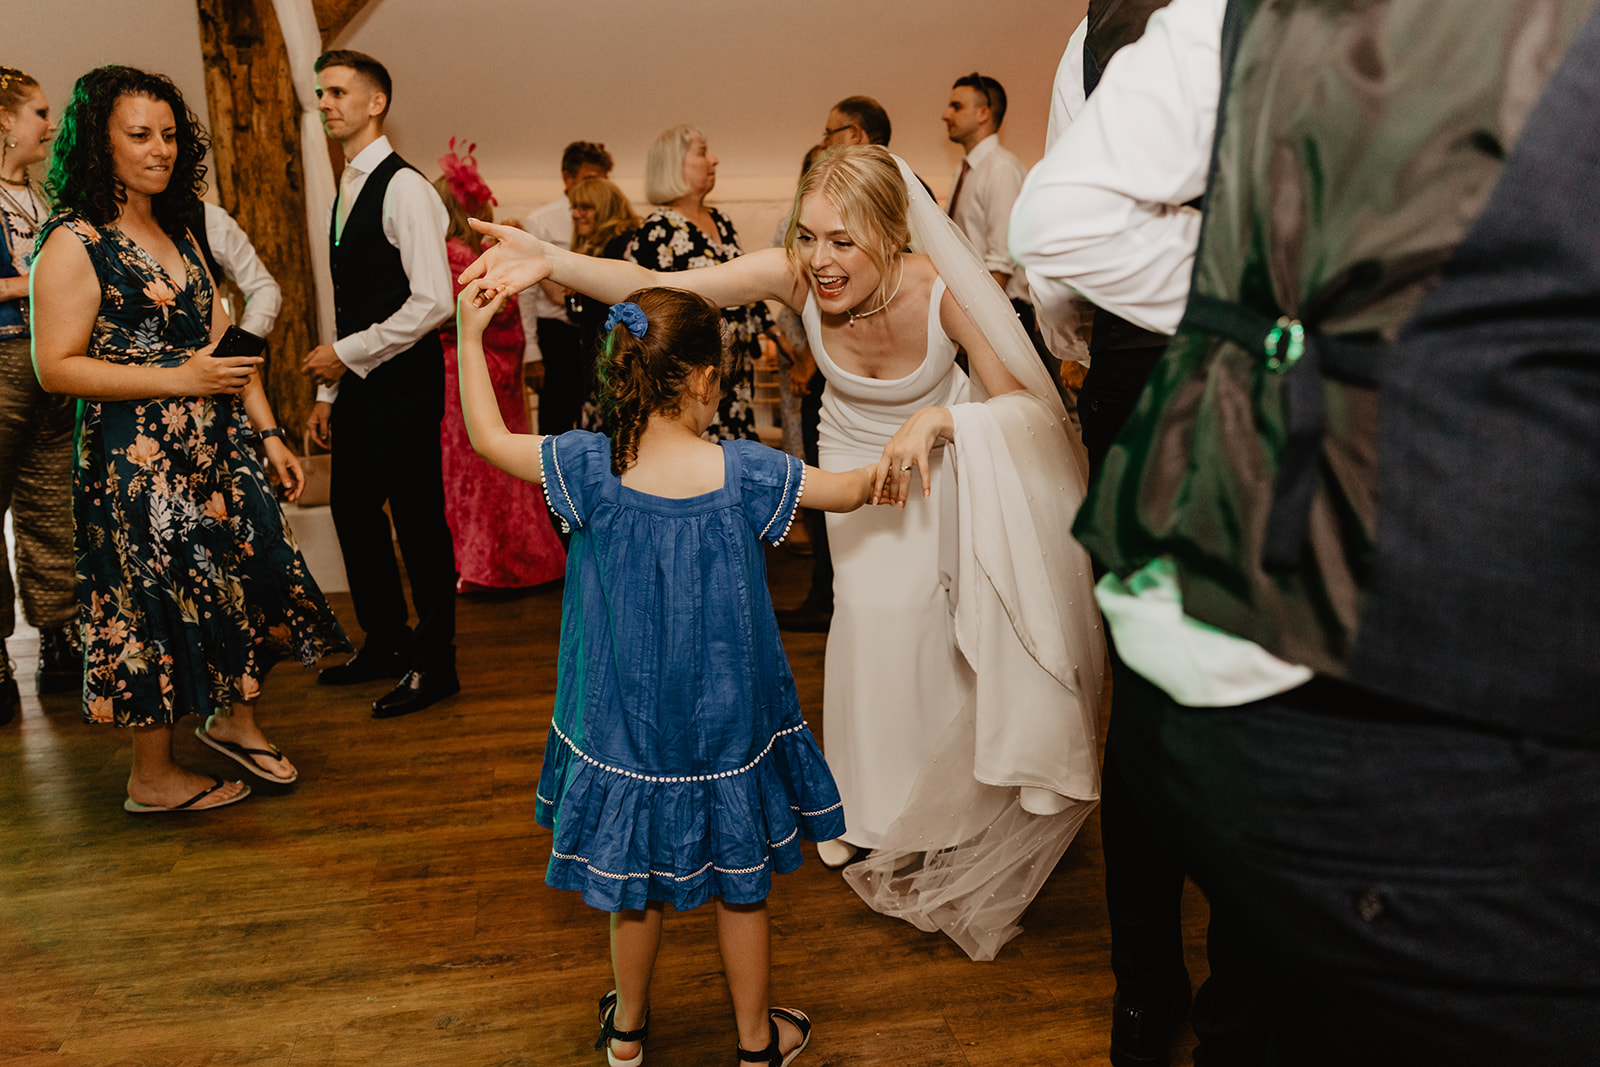 Evening dancing at a Bury Manor Barn Wedding in Sussex. Photographer OliveJoy Photography.